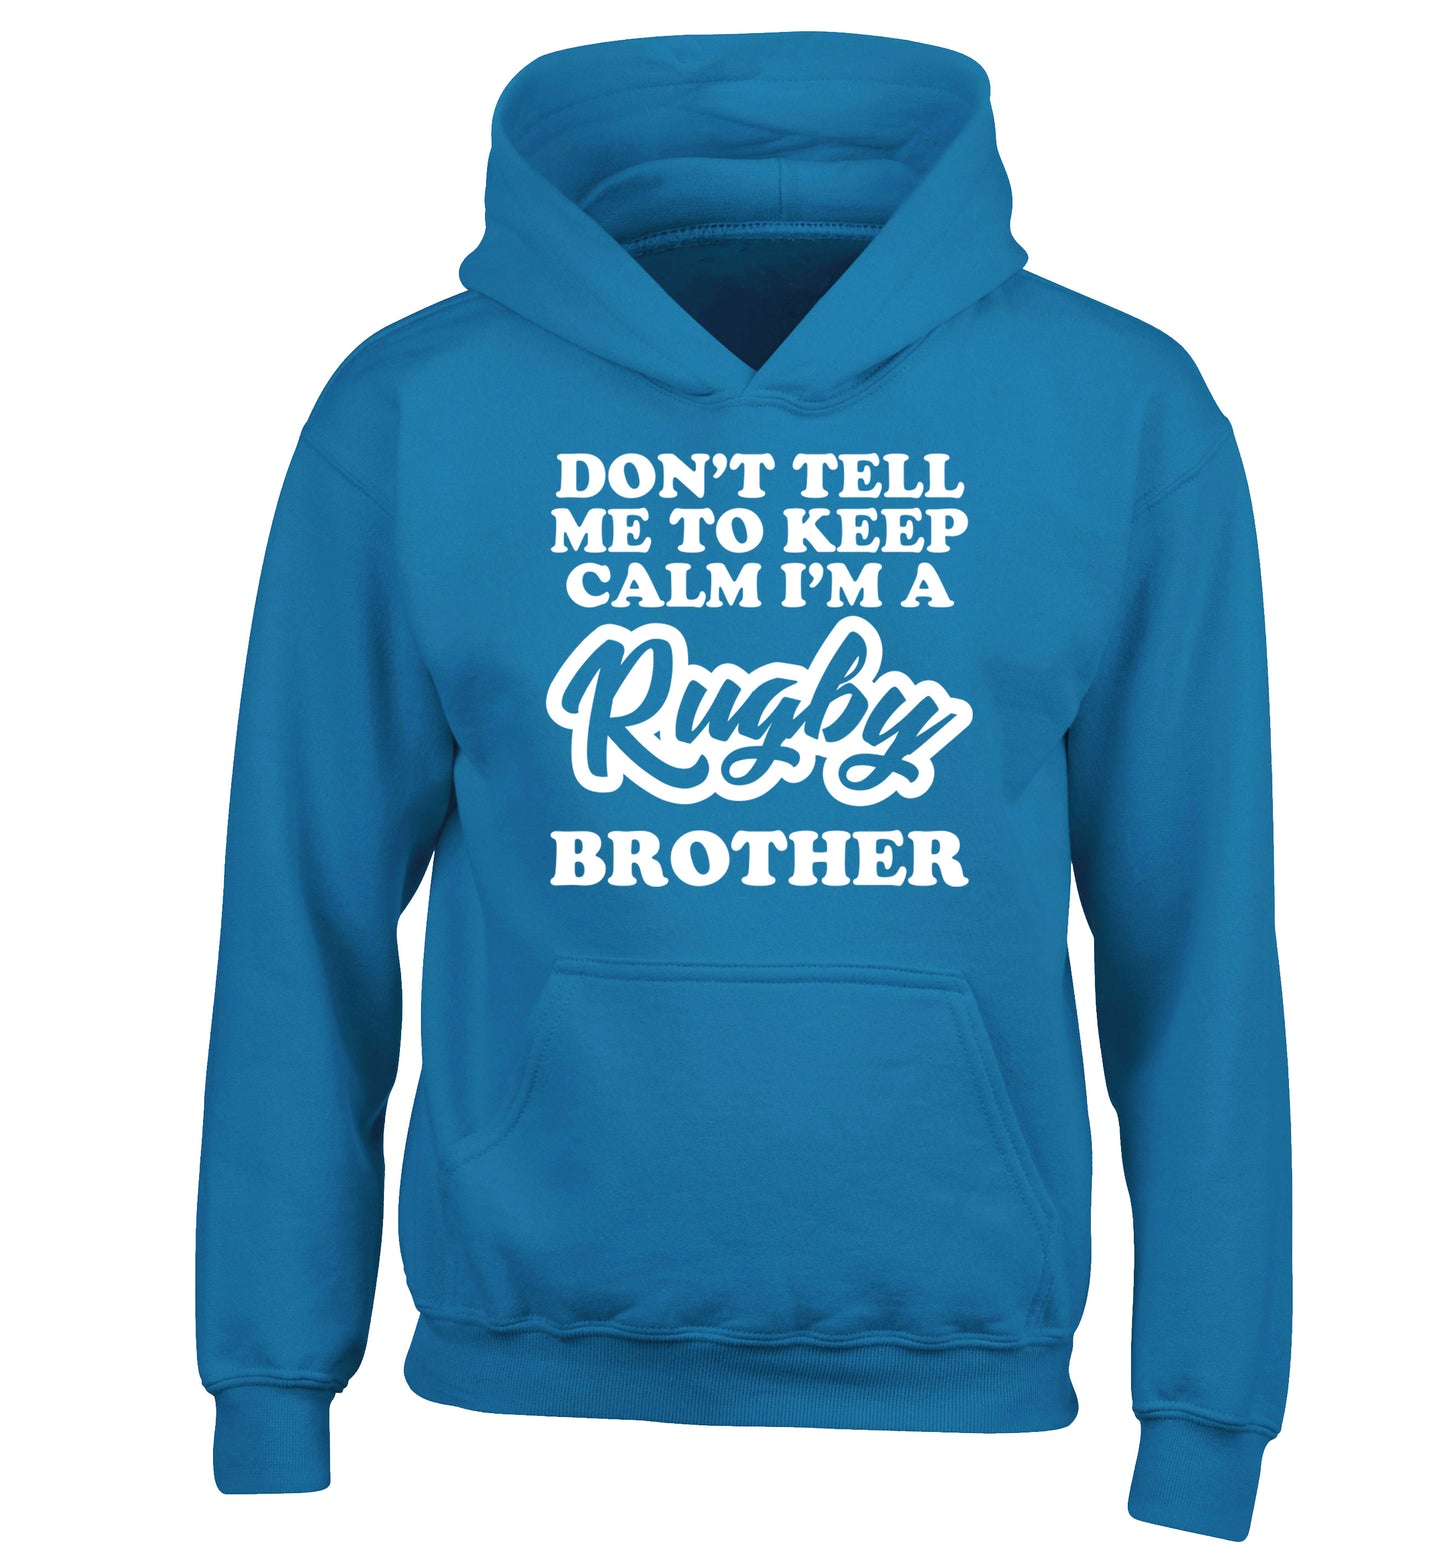 Don't tell me keep calm I'm a rugby brother children's blue hoodie 12-13 Years